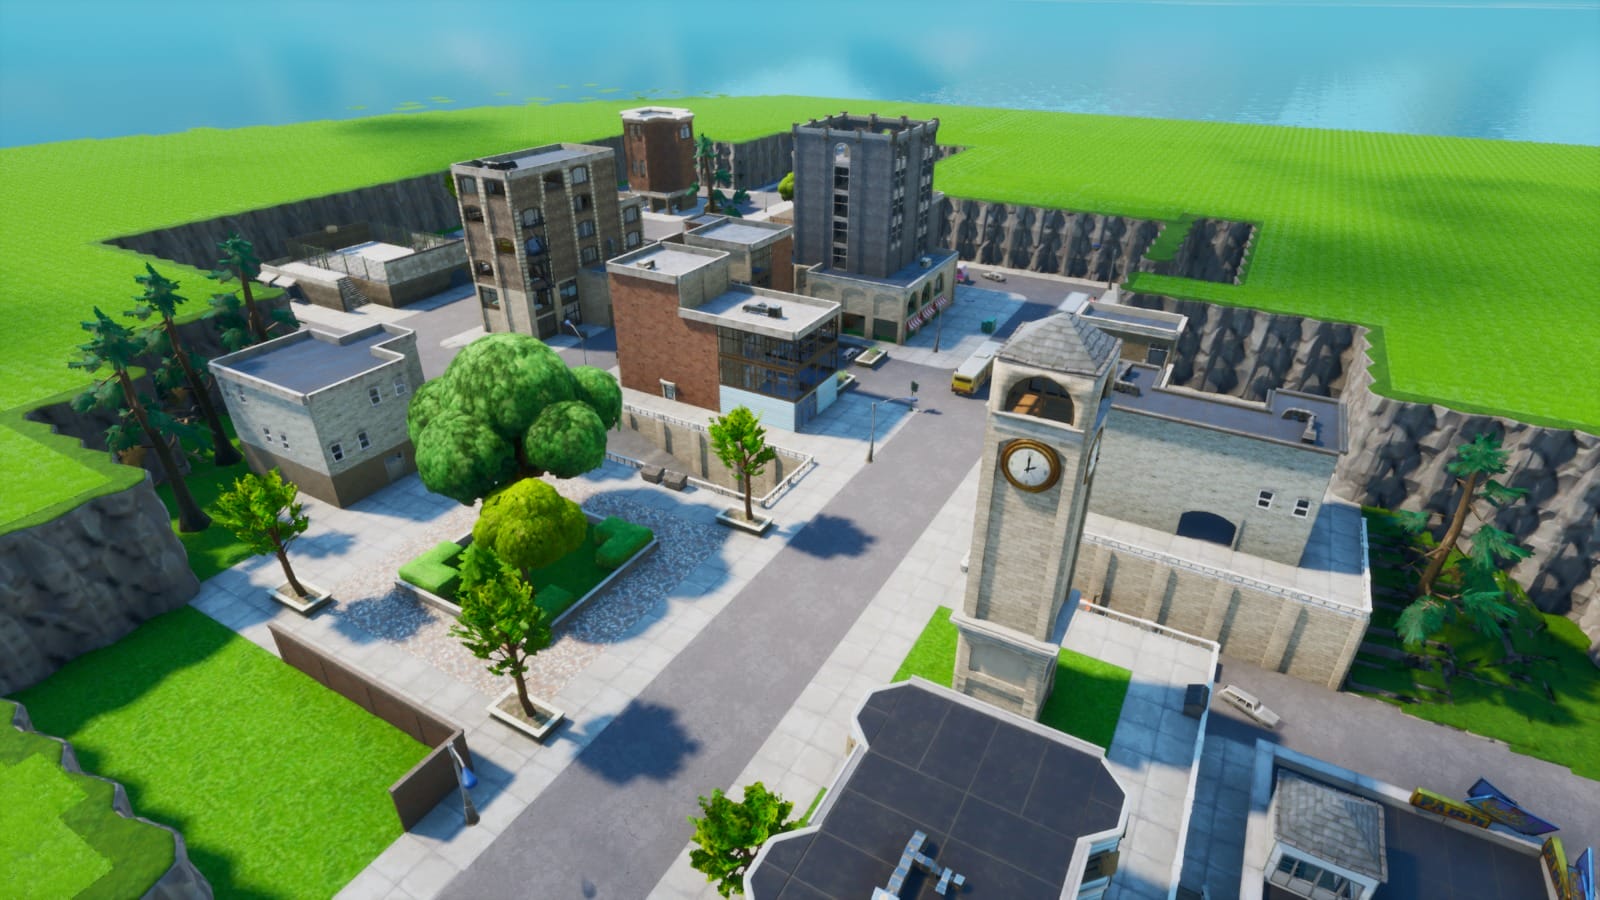 Tilted Towers Getting Struck by a Meteor? Why Not the 